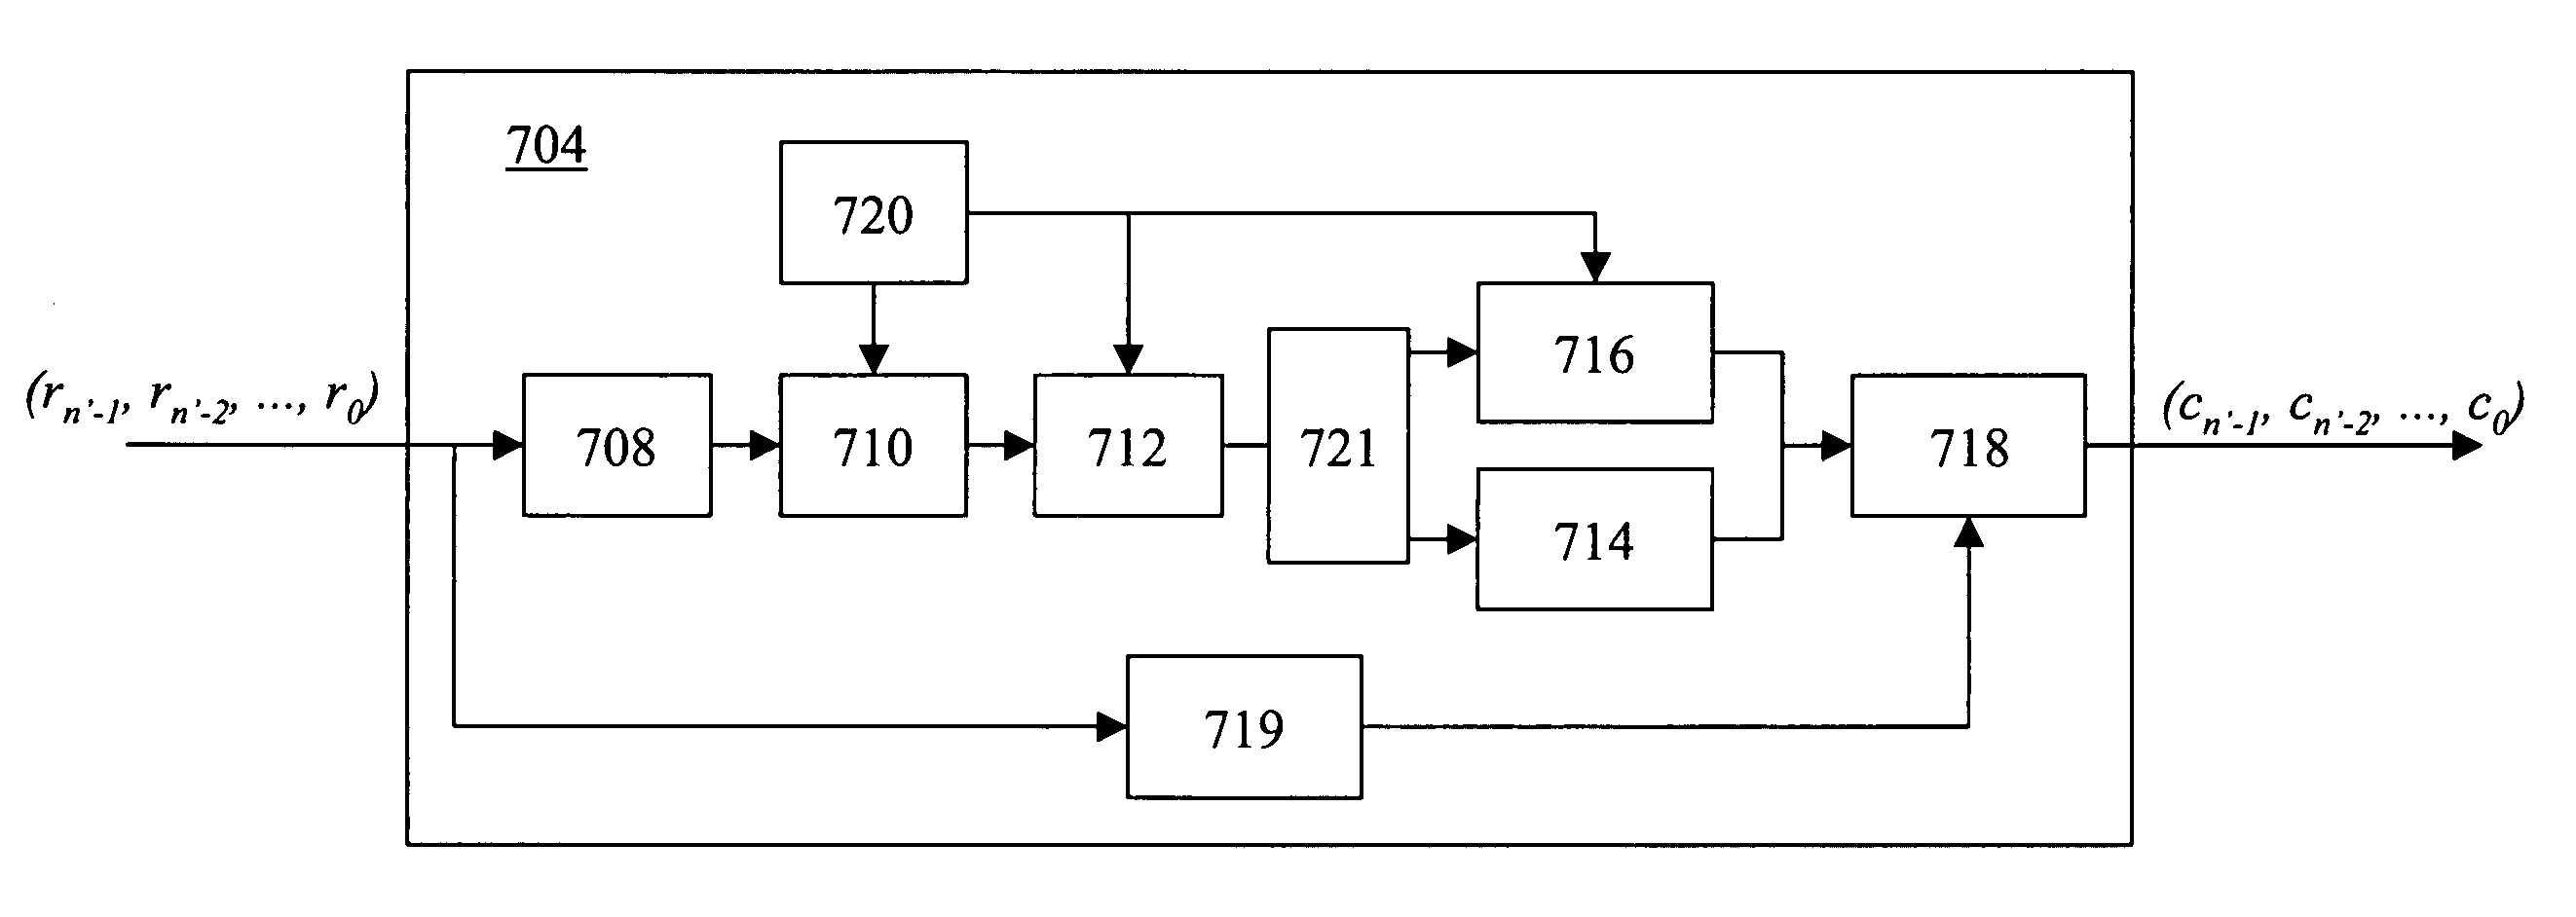 High speed hardware implementation of modified Reed-Solomon decoder